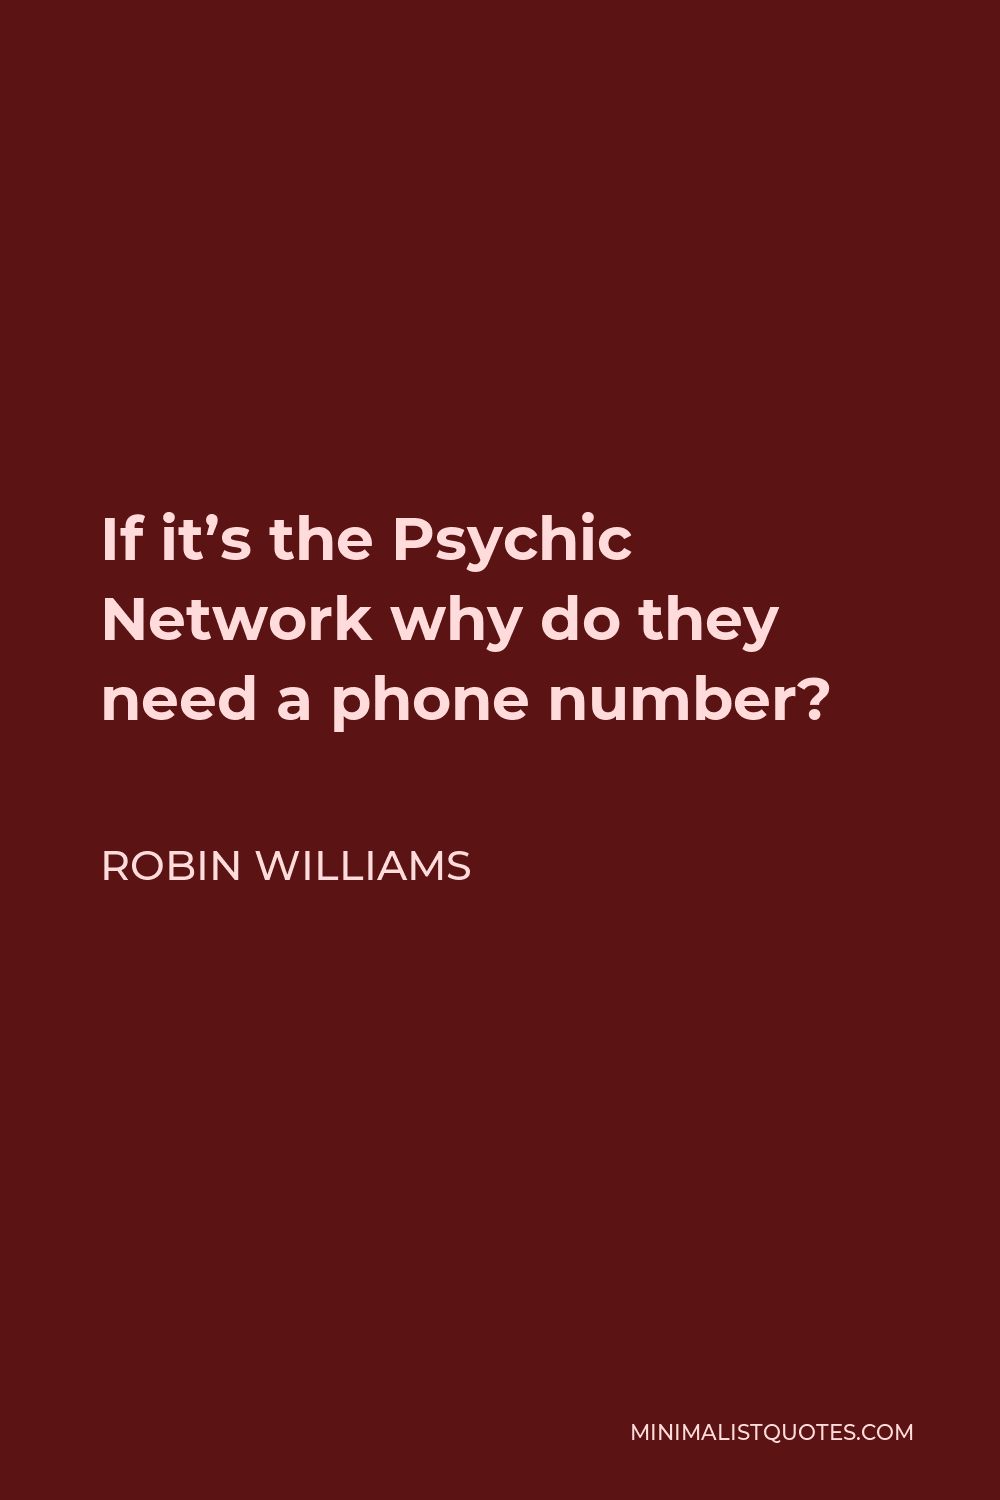 Robin Williams Quote - If it’s the Psychic Network why do they need a phone number?